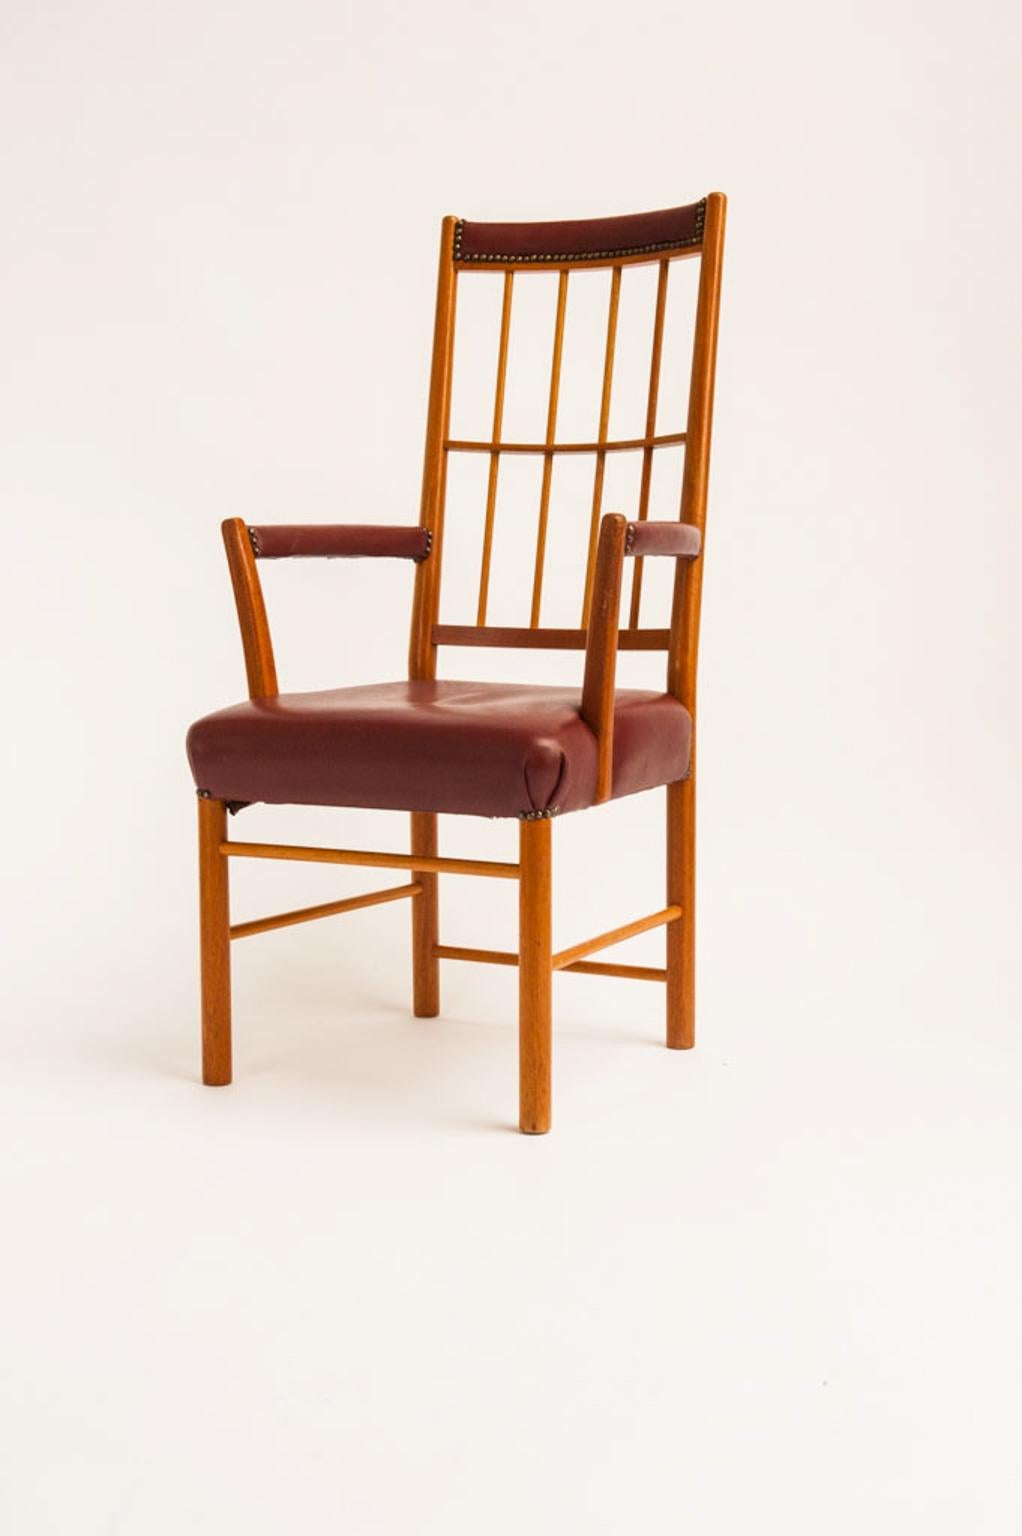 Beautiful armchair, model 652, designed by Josef Frank for Svenskt Tenn. Frame in mahogany. Upholstered with wine red leather.

This elegant armchair was designed by Josef Frank in 1936 and three years later, it was used at the Golden Gate